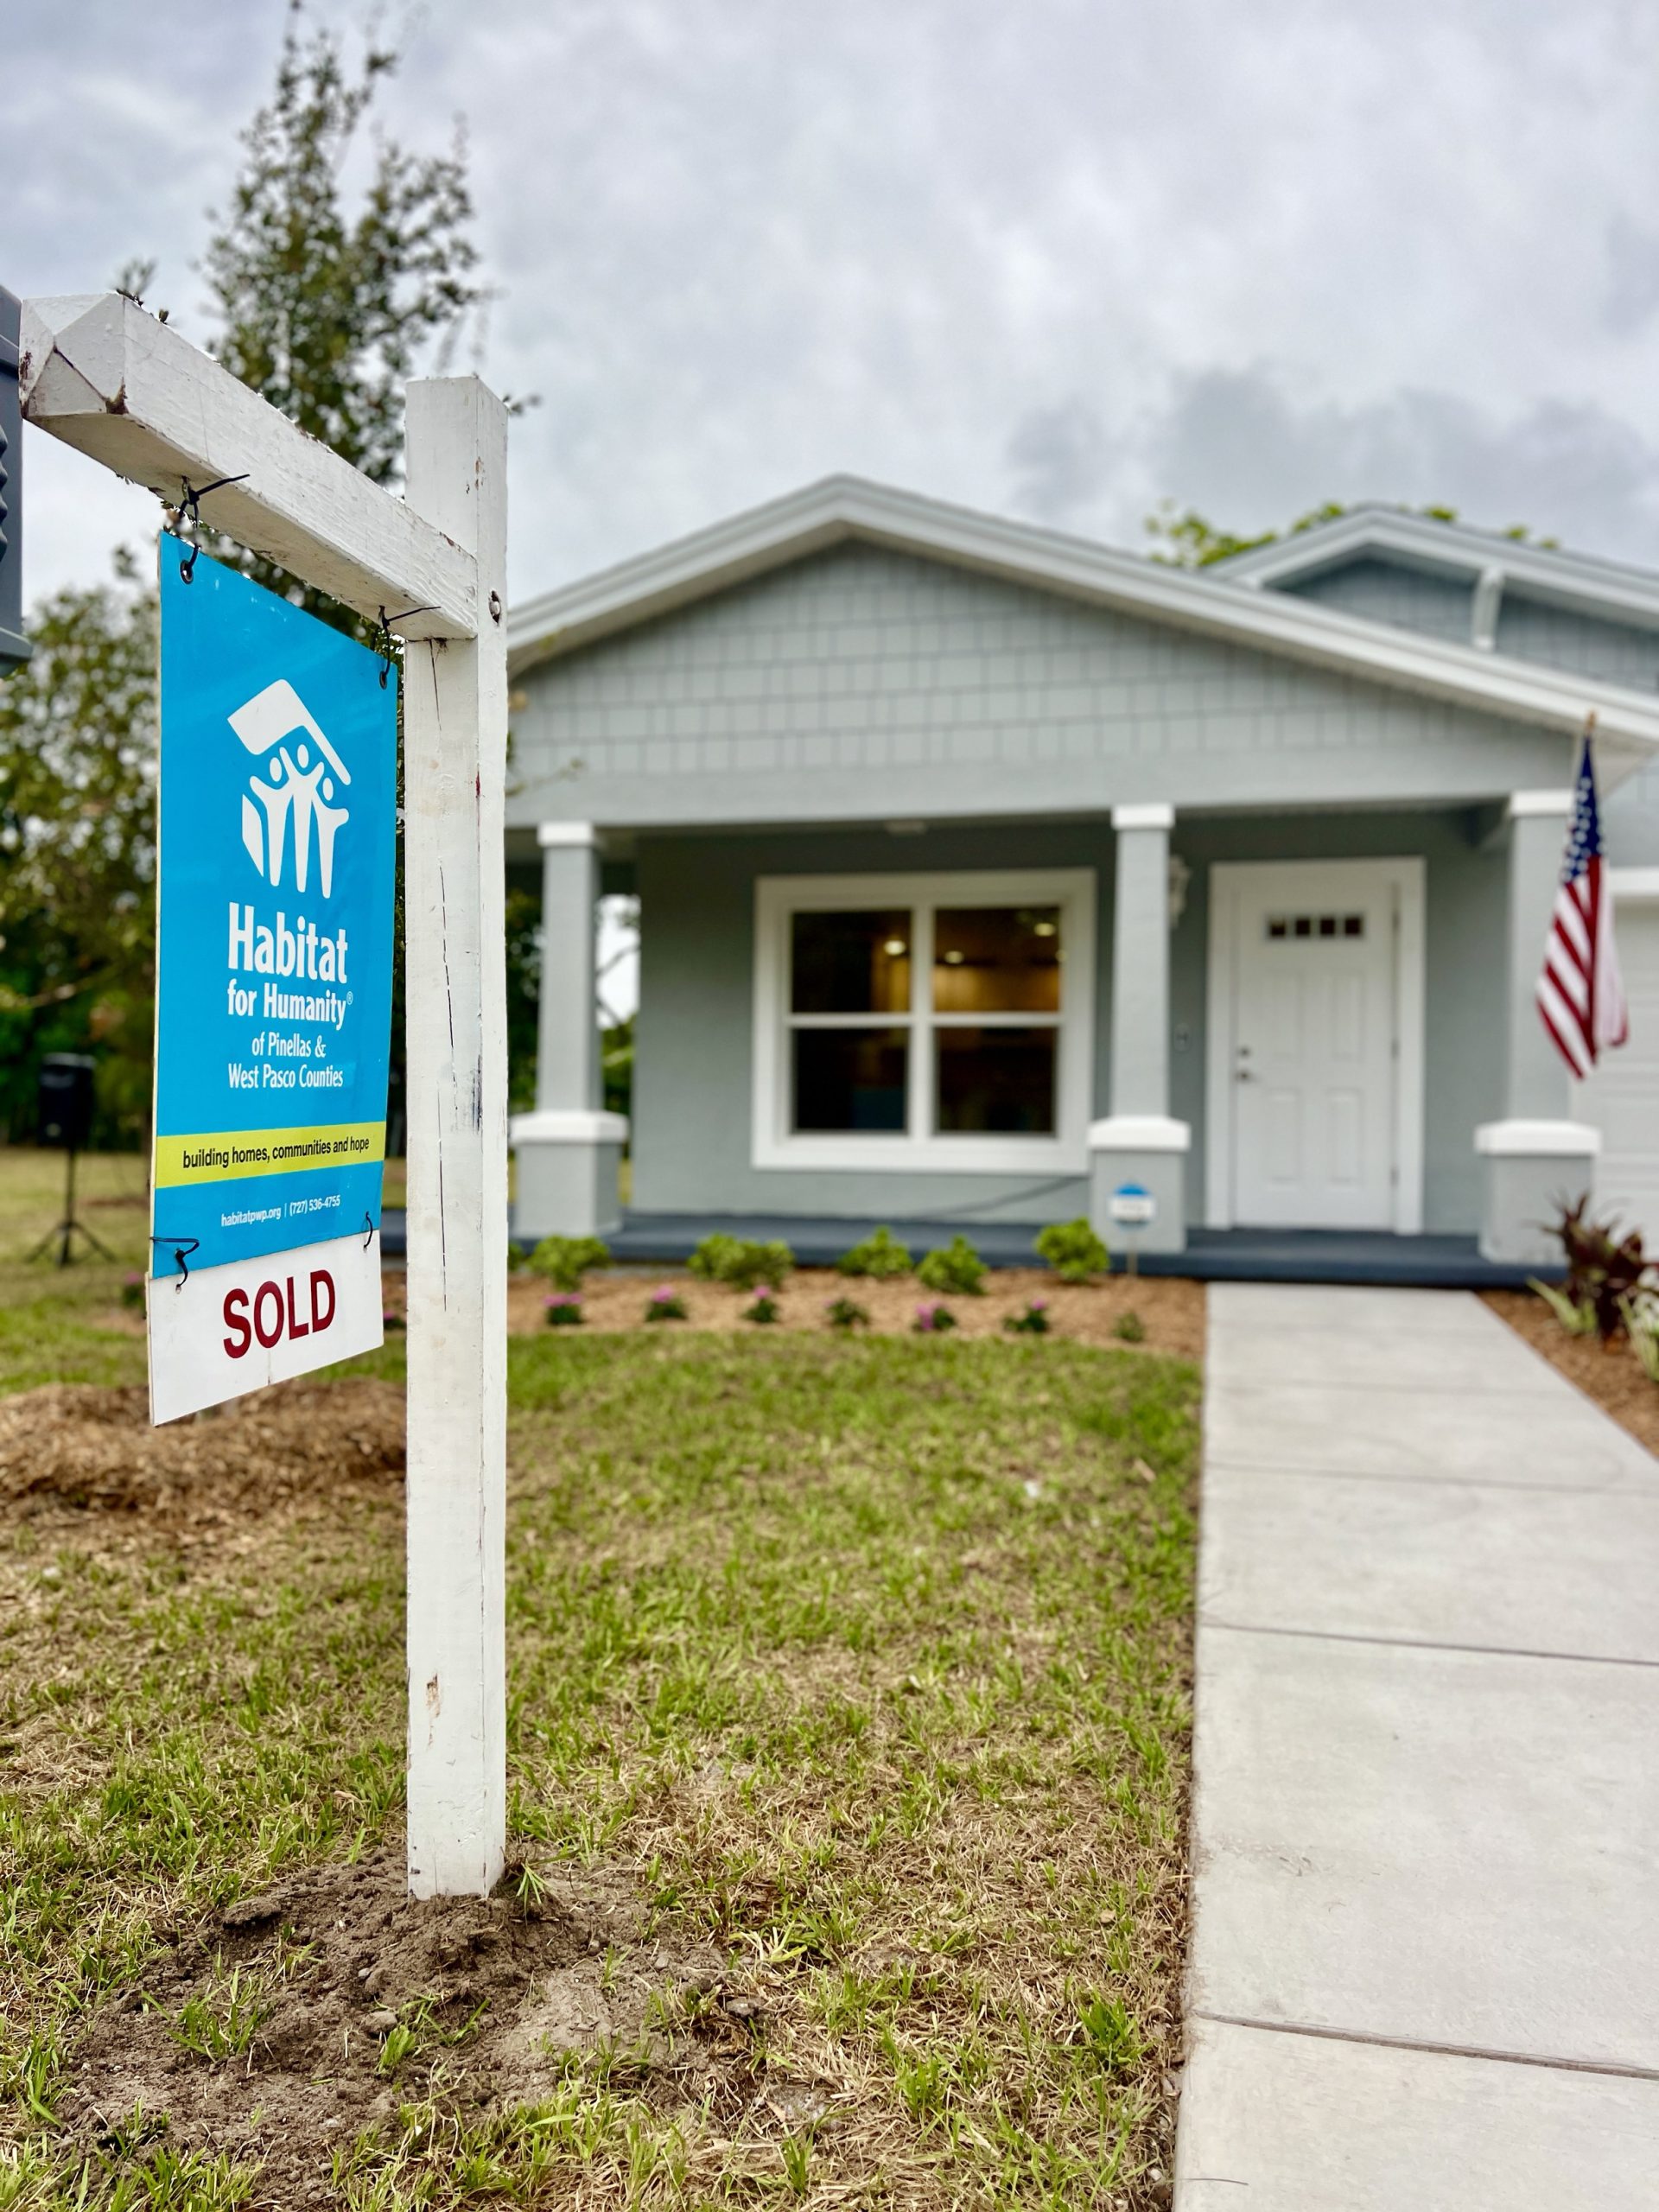 Habitat Will Welcome Two Families to Habitat Homes This Week